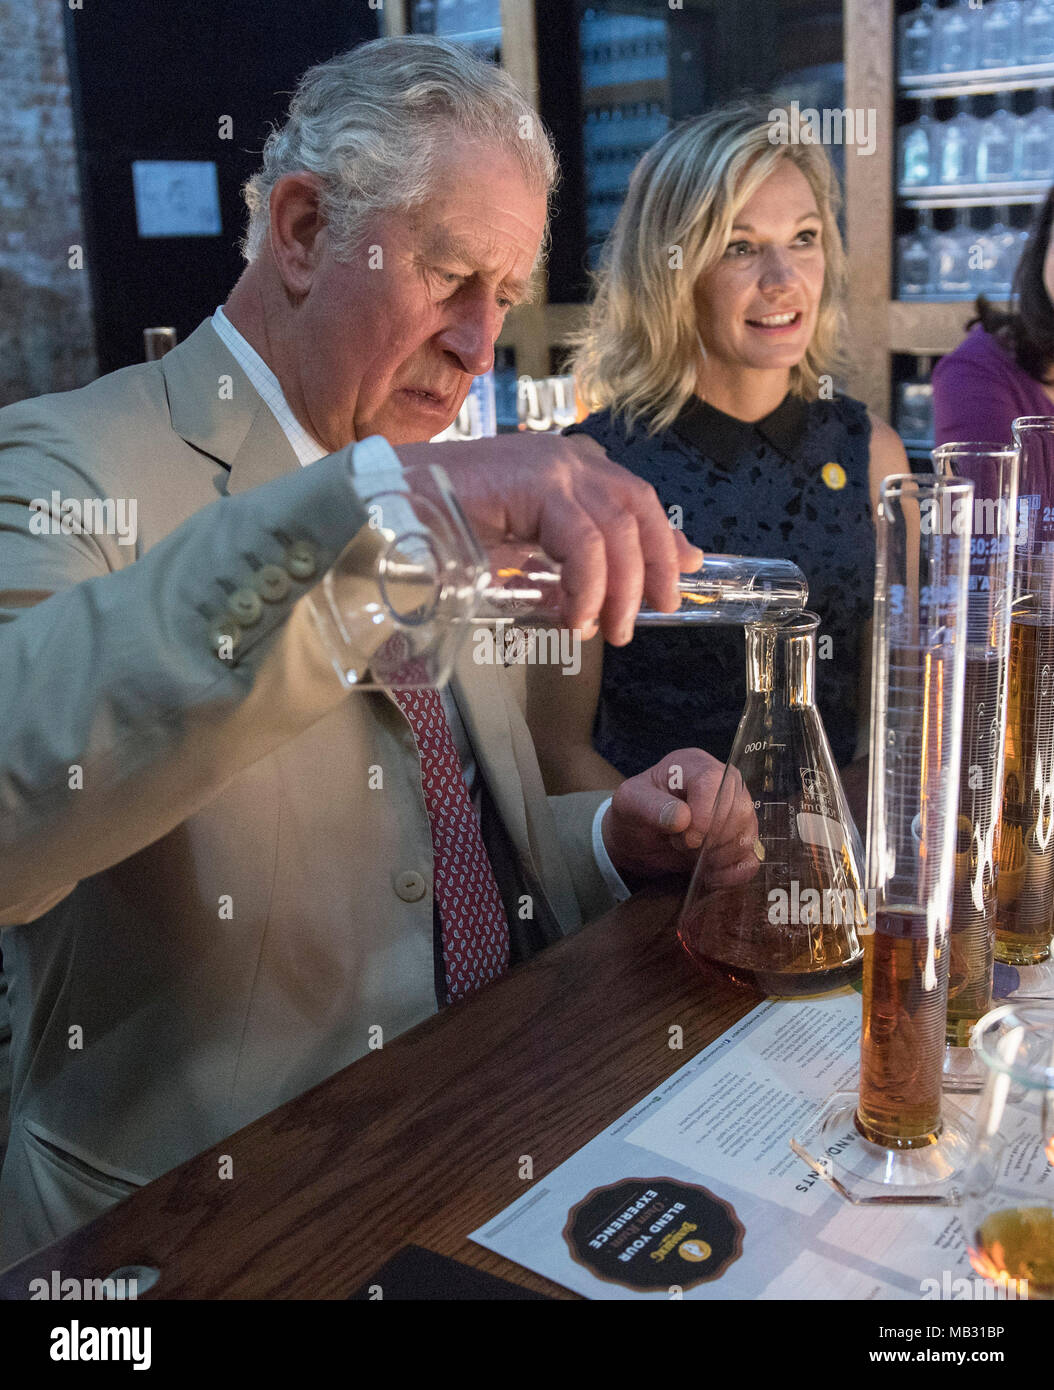 The Prince of Wales during a tour of the Bundaberg Rum Distillery, including the renovated Bundaberg Rum Museum and he attended a community festival. Stock Photo